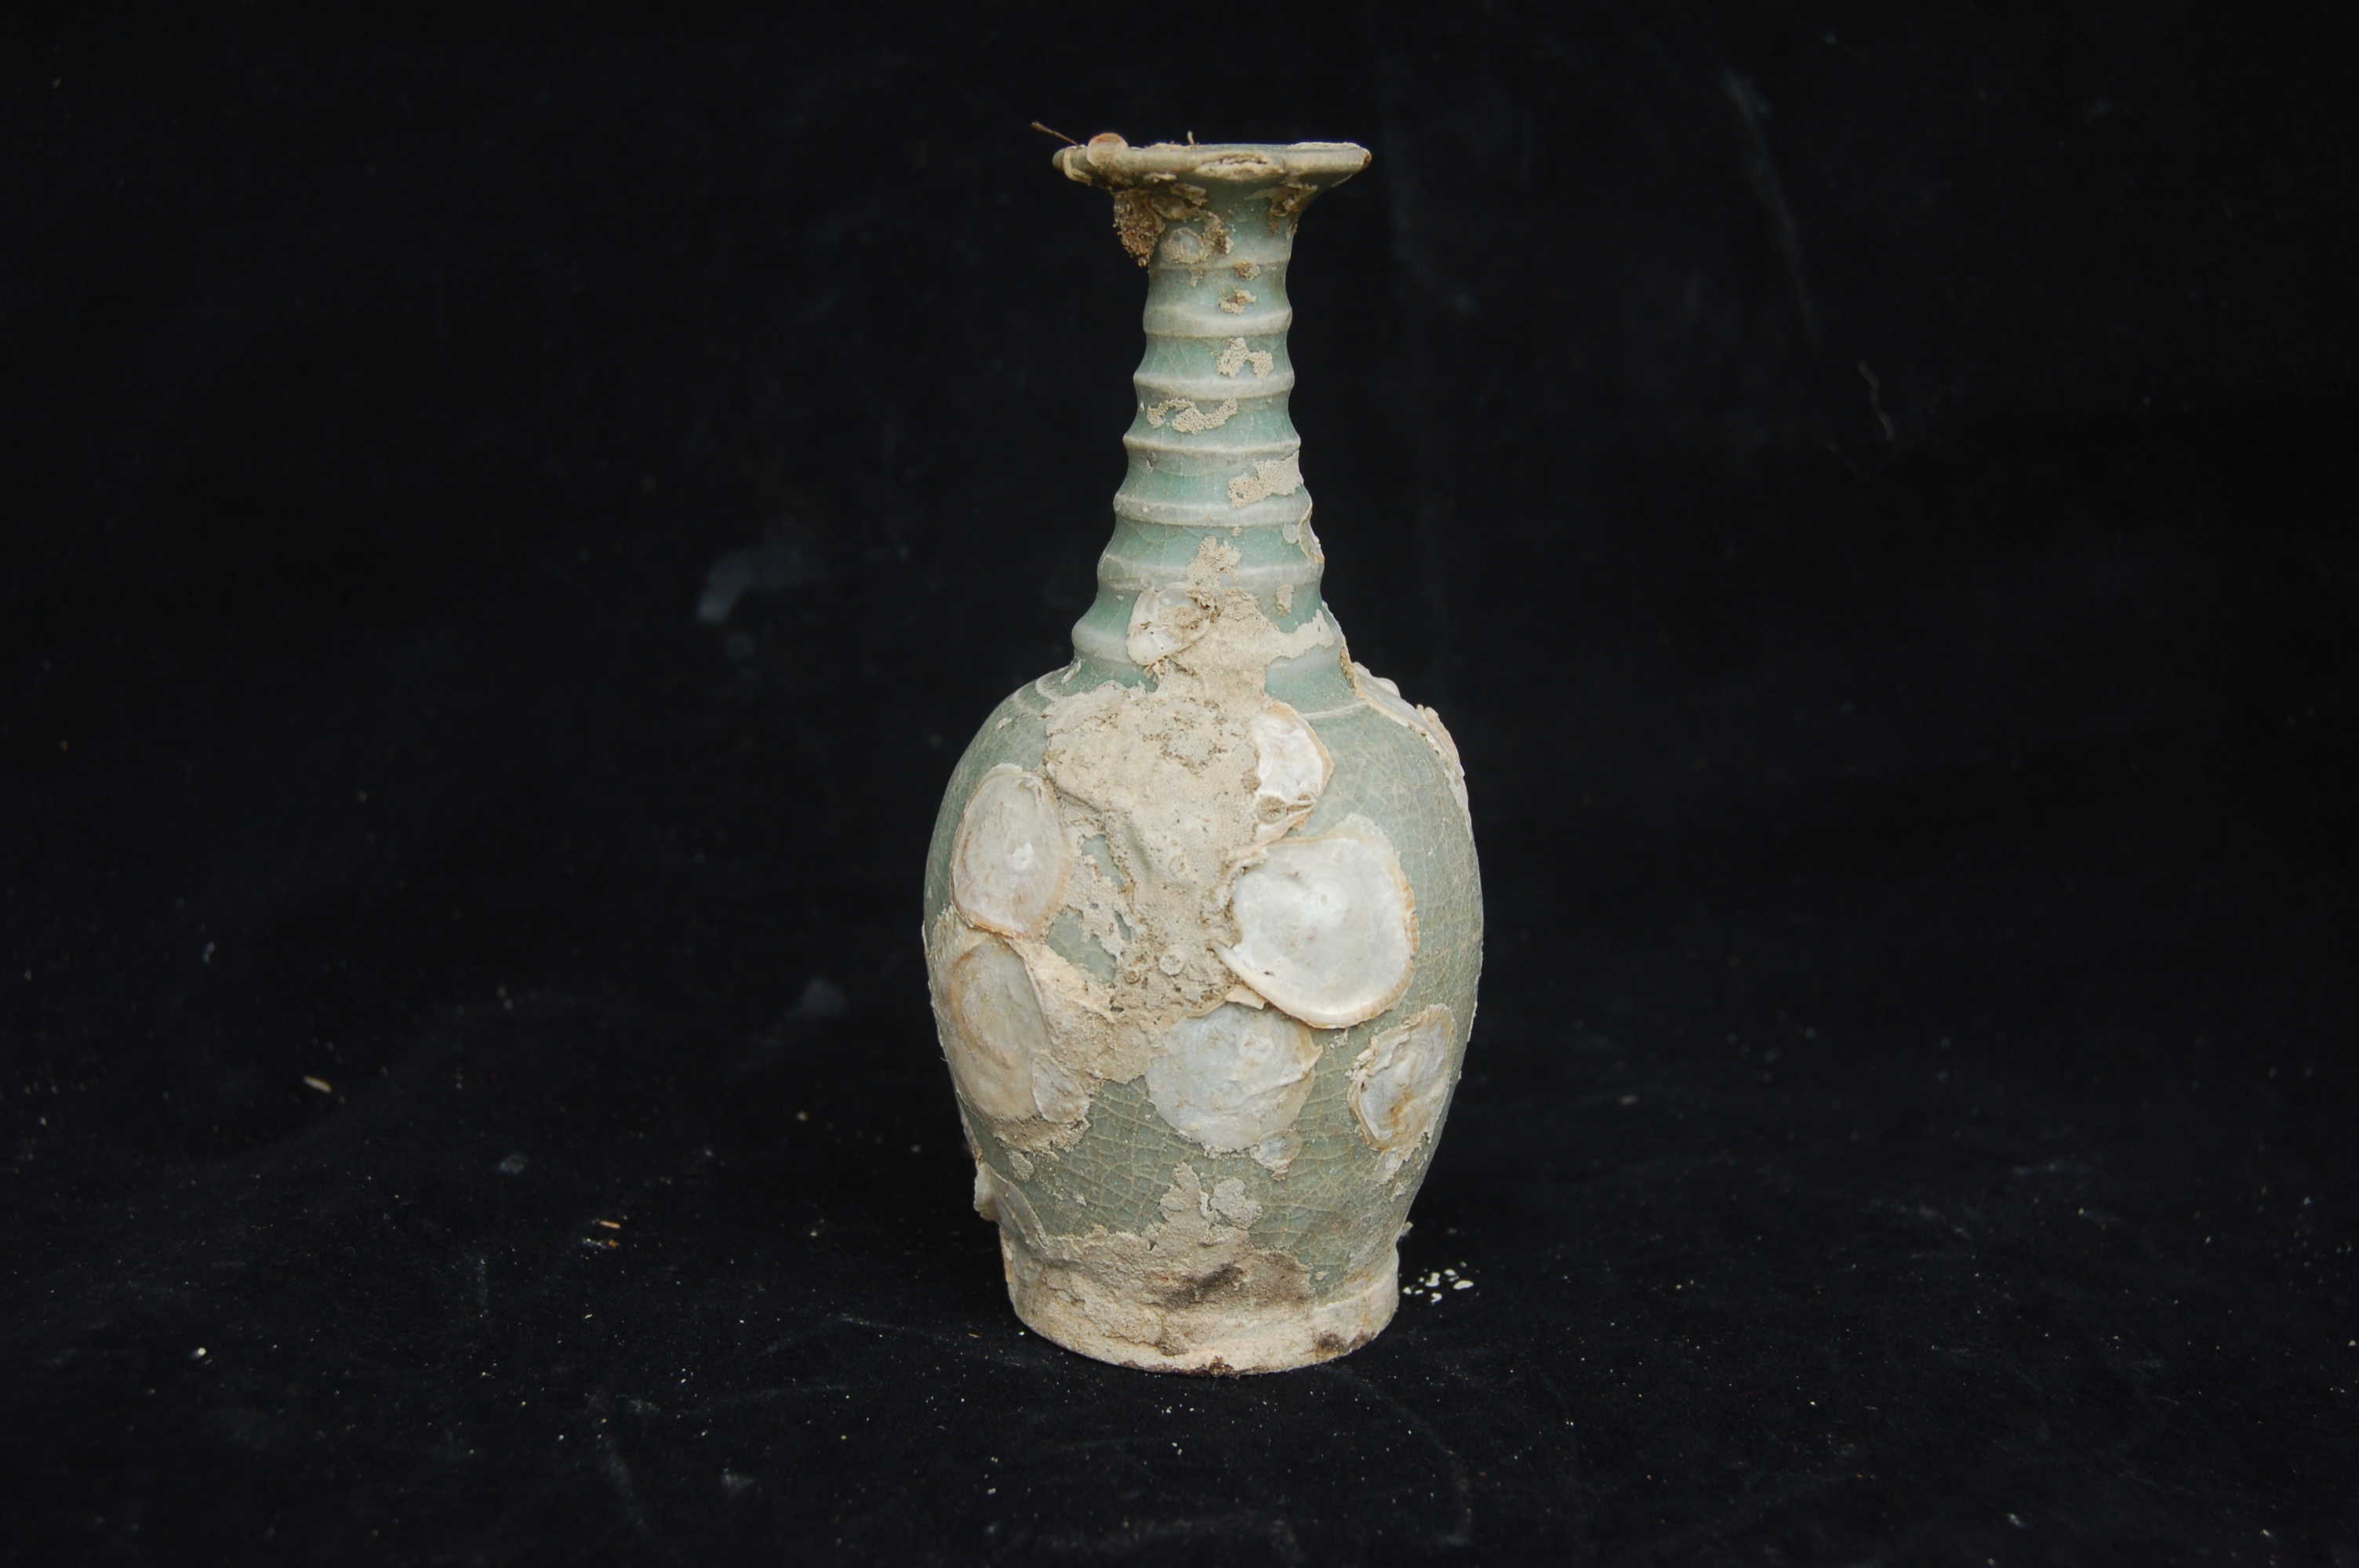 Vase with a green glaze and subtly lobed body. The rings around the tall tapering neck are carved so deeply that they form flanges. The mouth is elegantly flared, while the carved foot-ring is near vertical. Diameter 6.5 cm, height 13.5 cm.